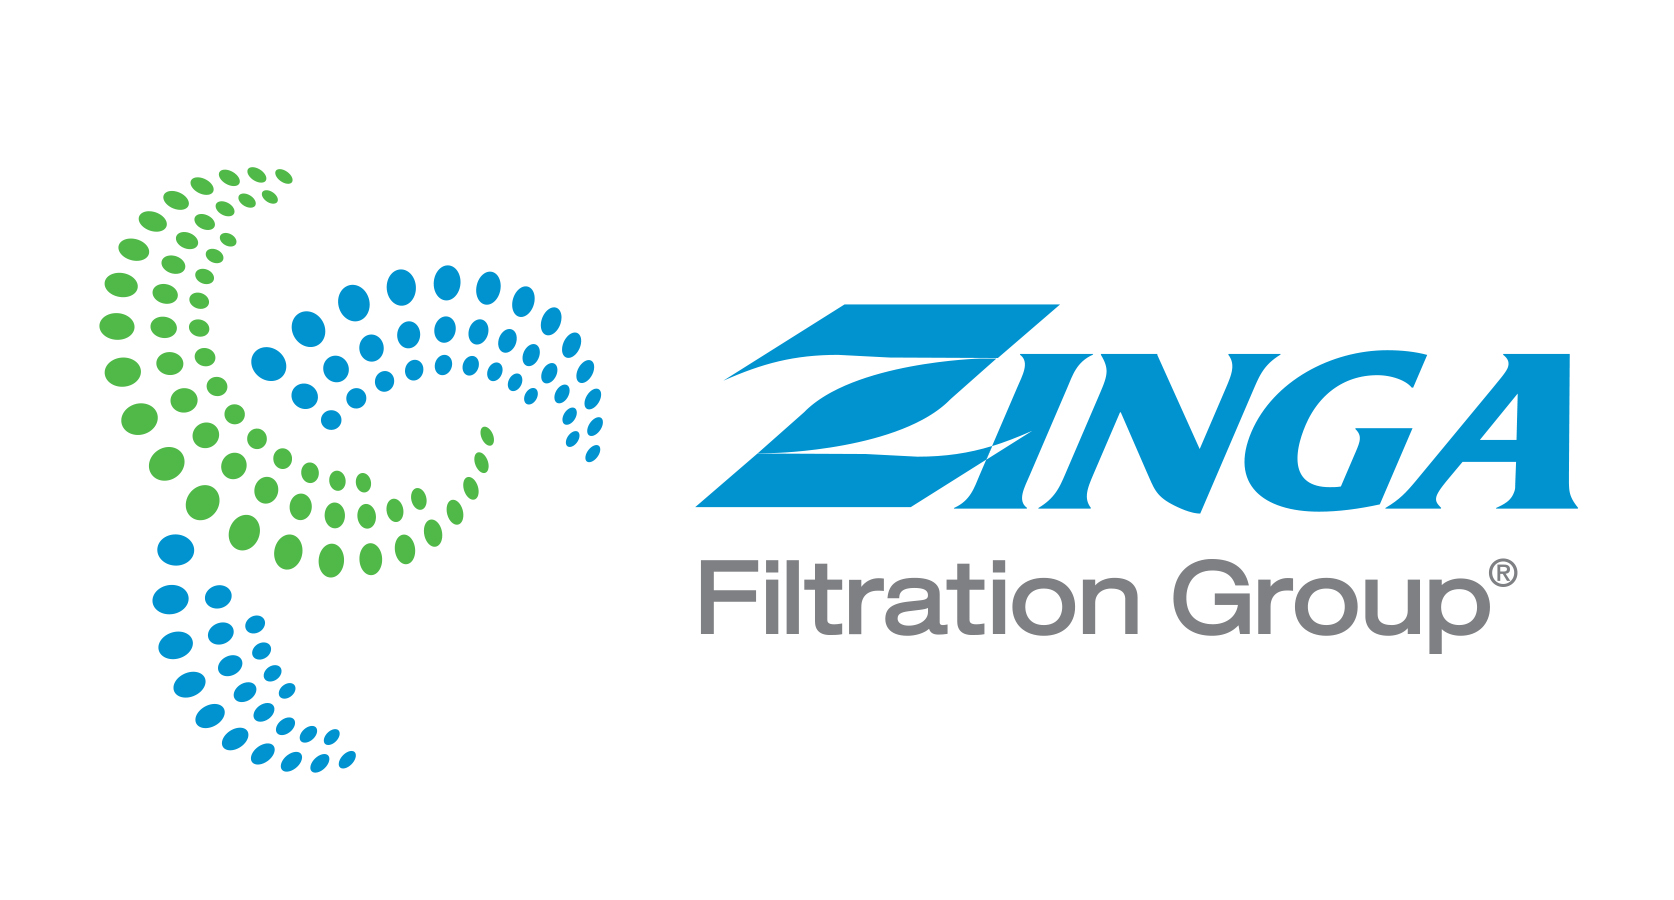 Zinga Pmscoated Filtration Group Industrial